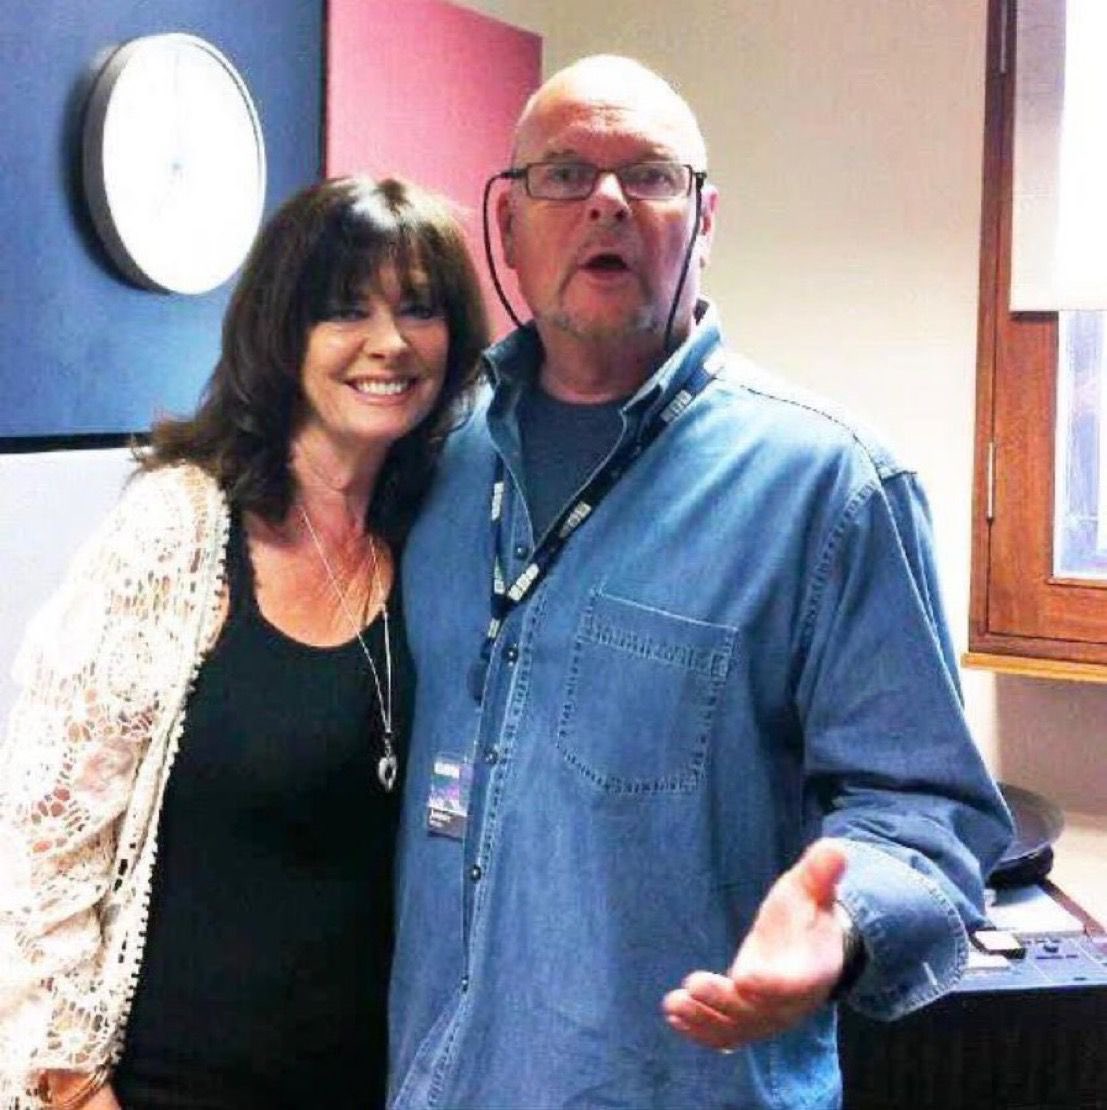 Happy Birthday Fabulous James Whale MBE. Great presenter He had a wonderful party to celebrate his MBE. Lovely memory when I did his radio show. Hope you had a great day. @THEJamesWhale @TalkTV #TalkRadio #TheJamesWhaleShow #MondayMotivation